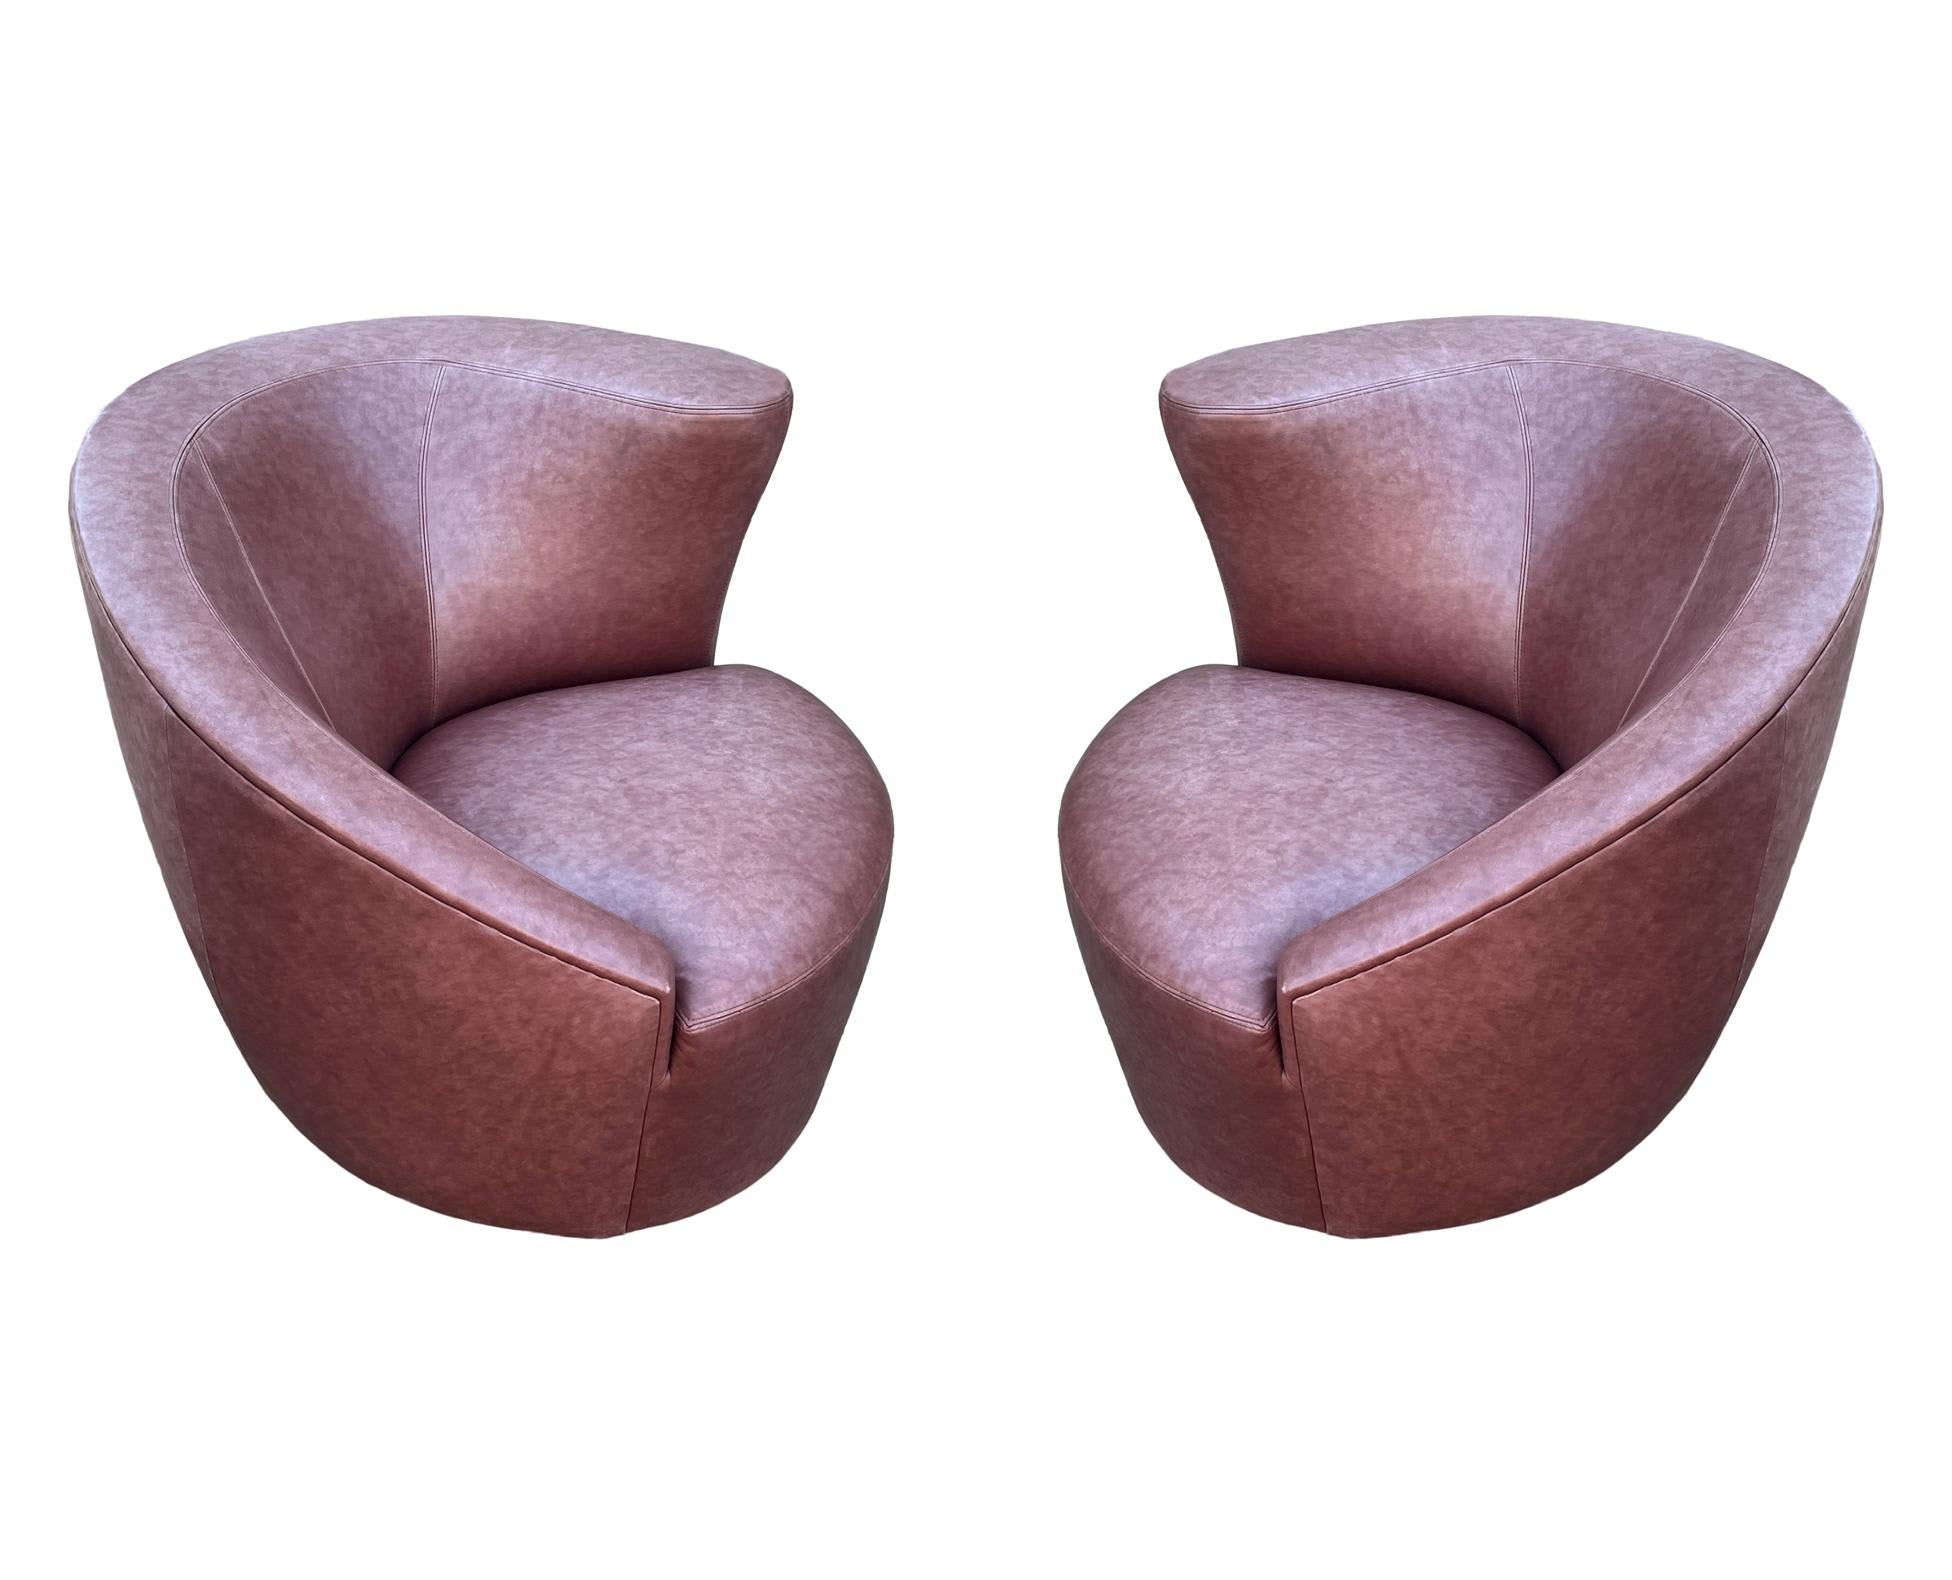 An authentic pair of nautilus chairs designed by Vladimir Kagan and produced by Directional. These are covered in their original leather. Leather is in poor condition, minor scuffs and one cut in chair seat. Recovering is recommended and priced